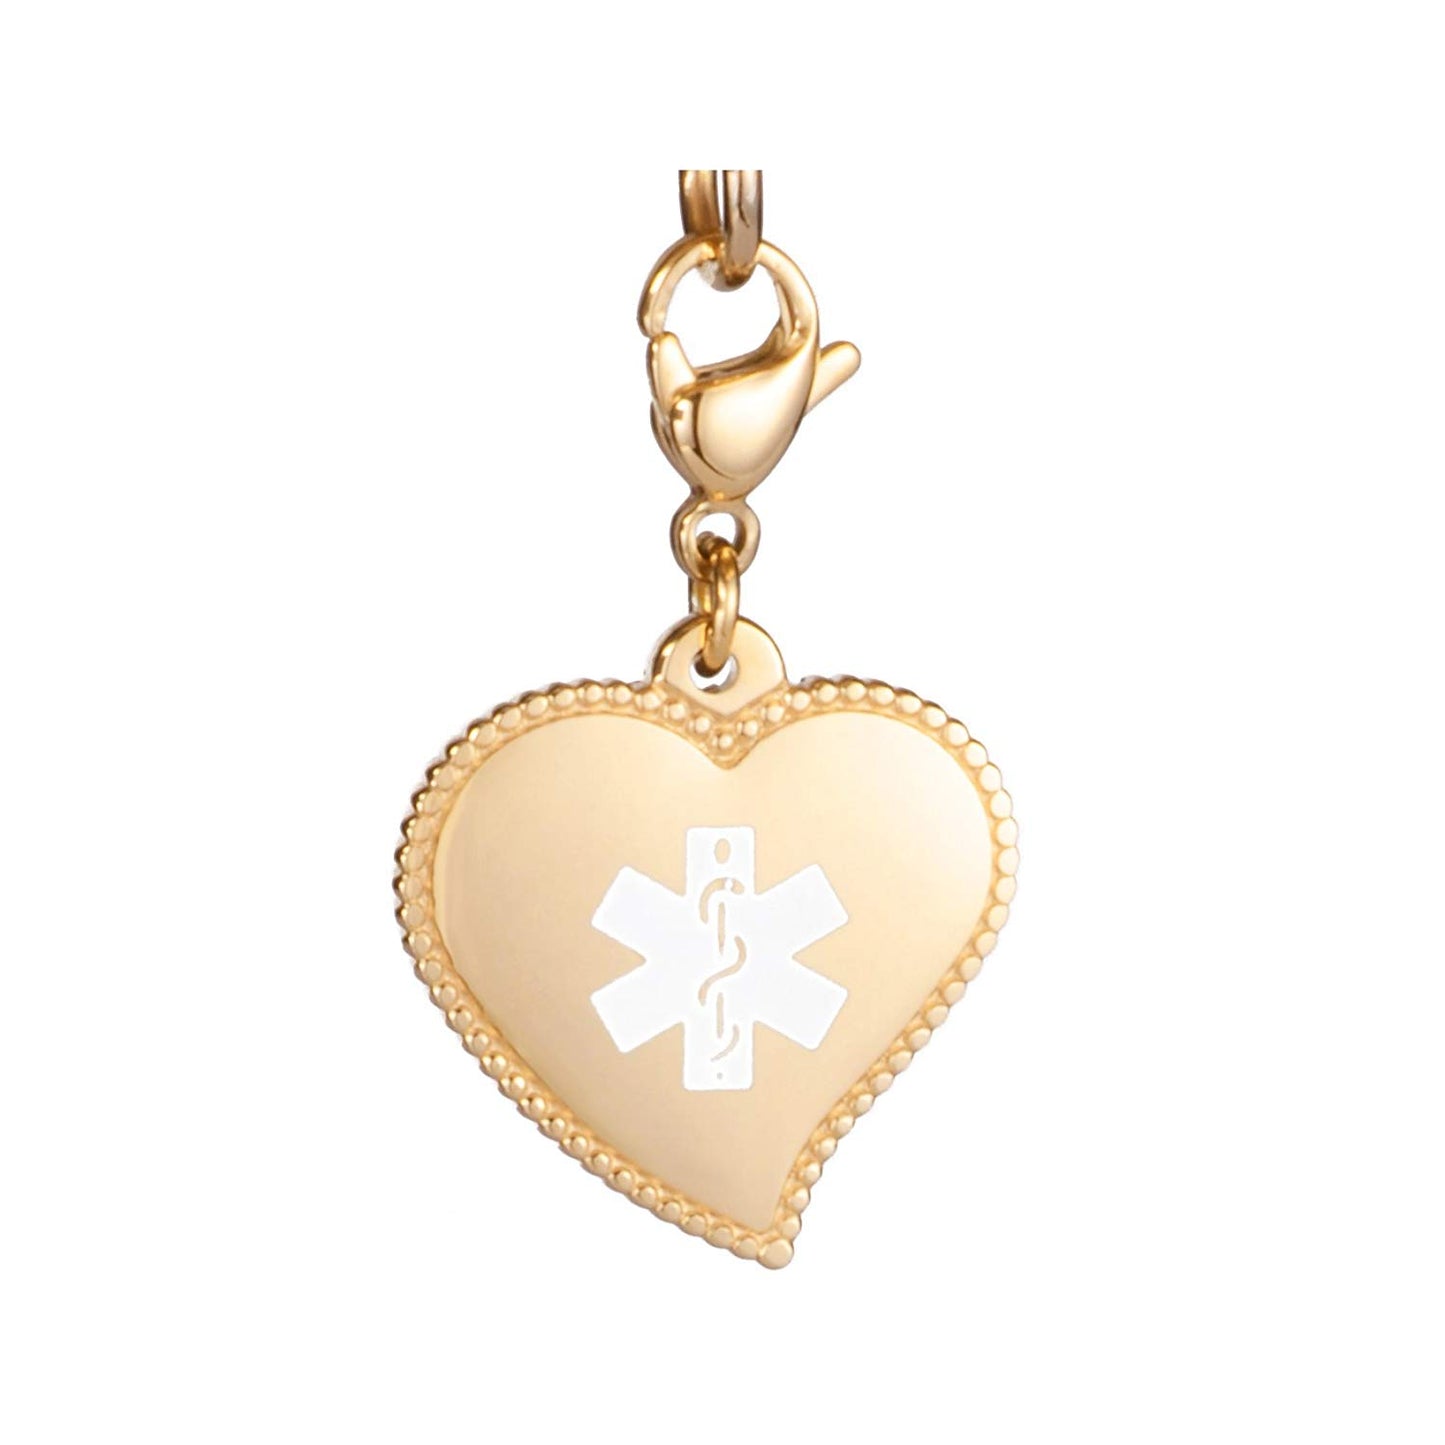 LinnaLove Heart-Shaped Medical Alert Charm with Lobster Clasp for Bracelets and Necklaces